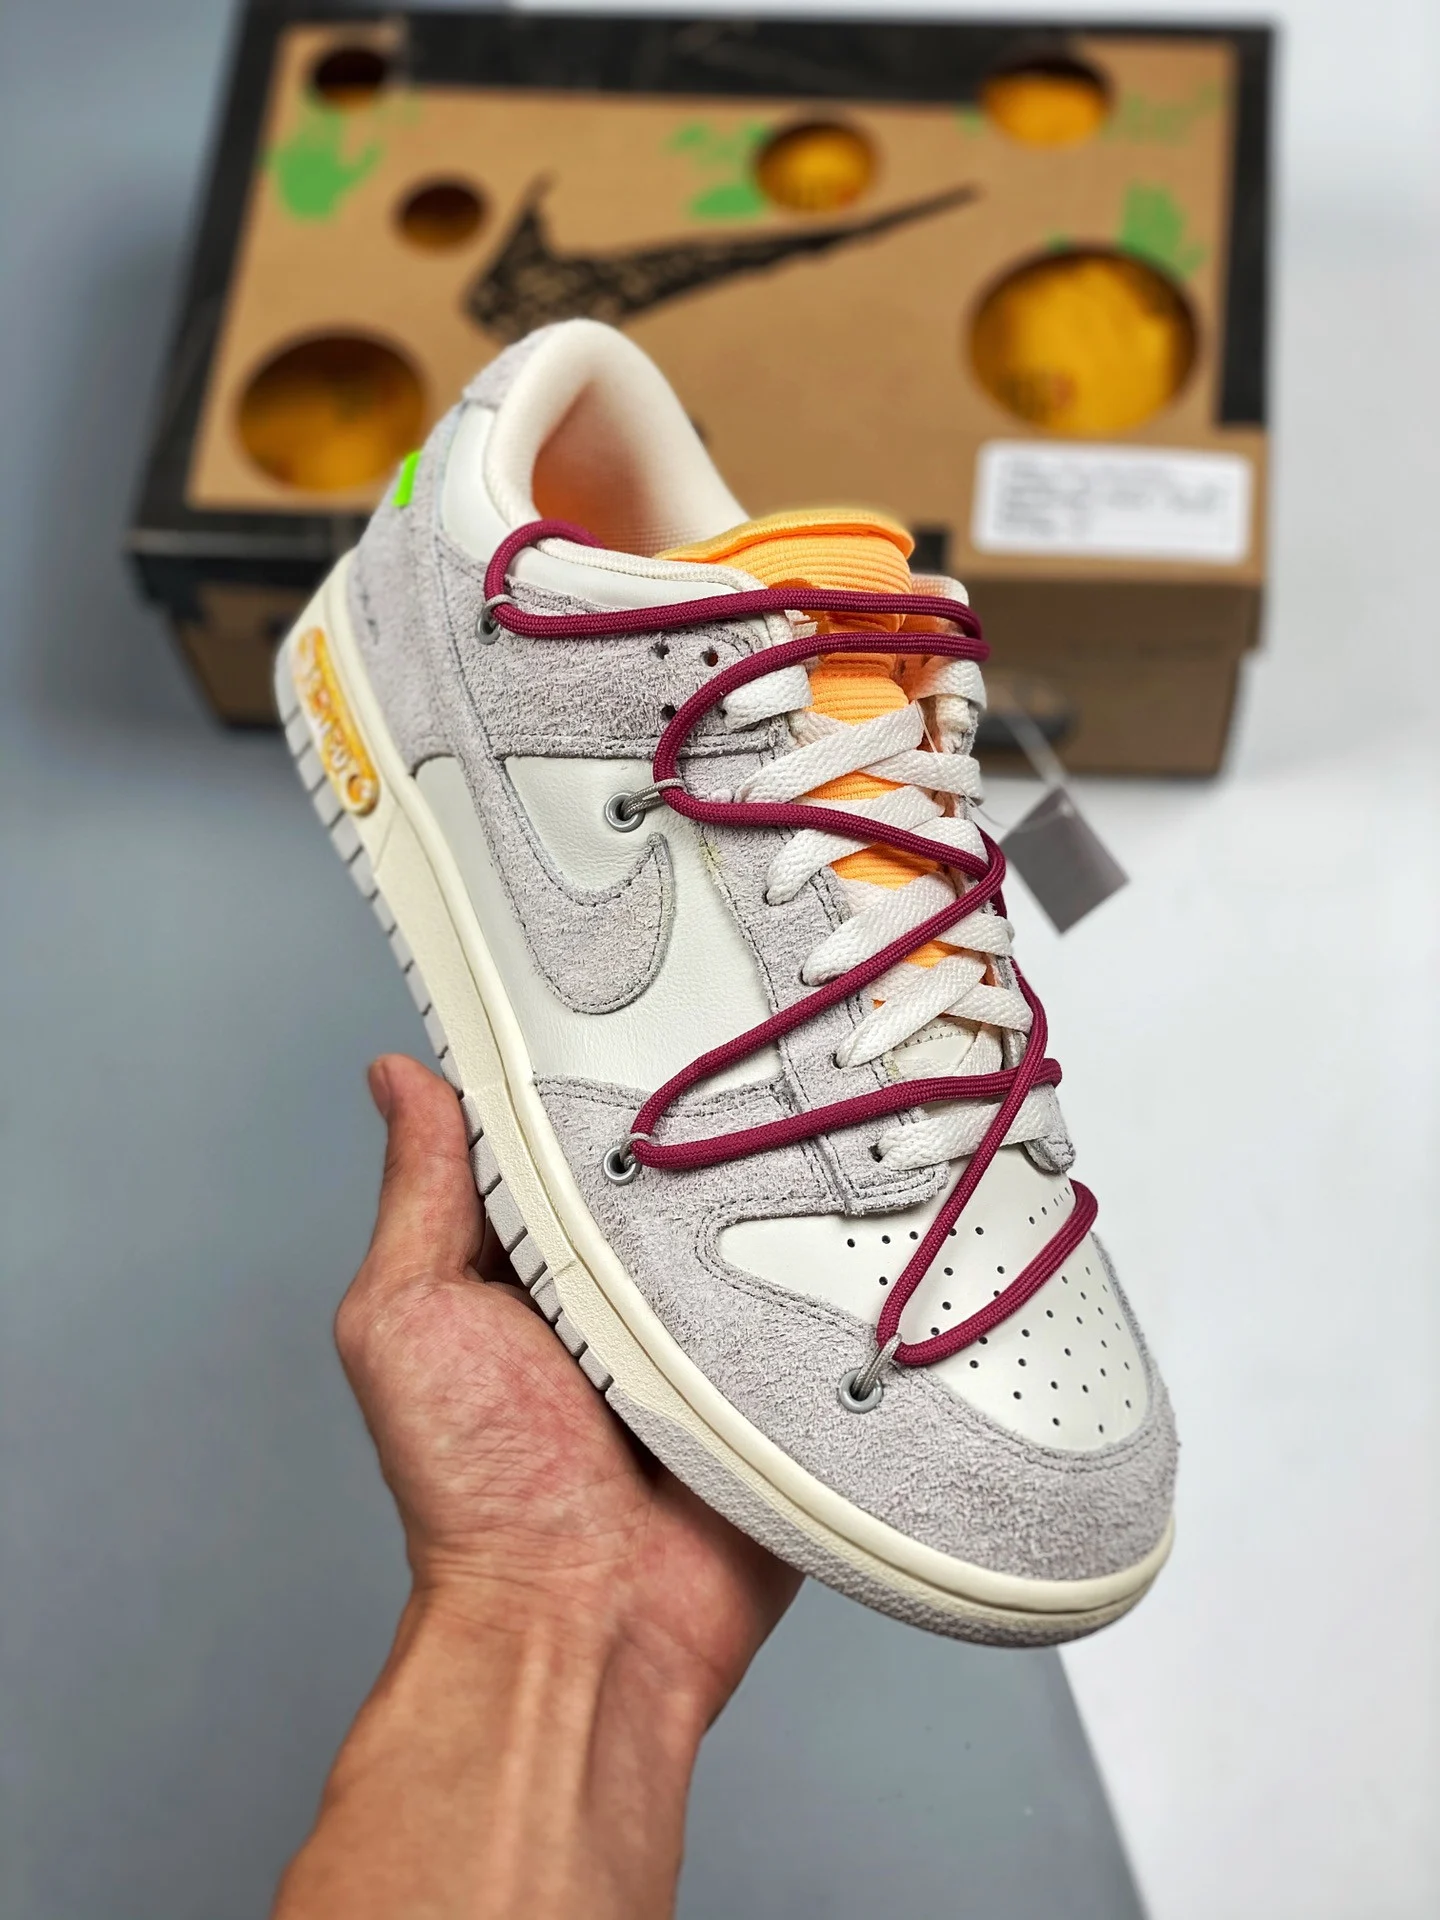 Off-White x Nike Dunk Low 33 of 50 Grey Sail For Sale